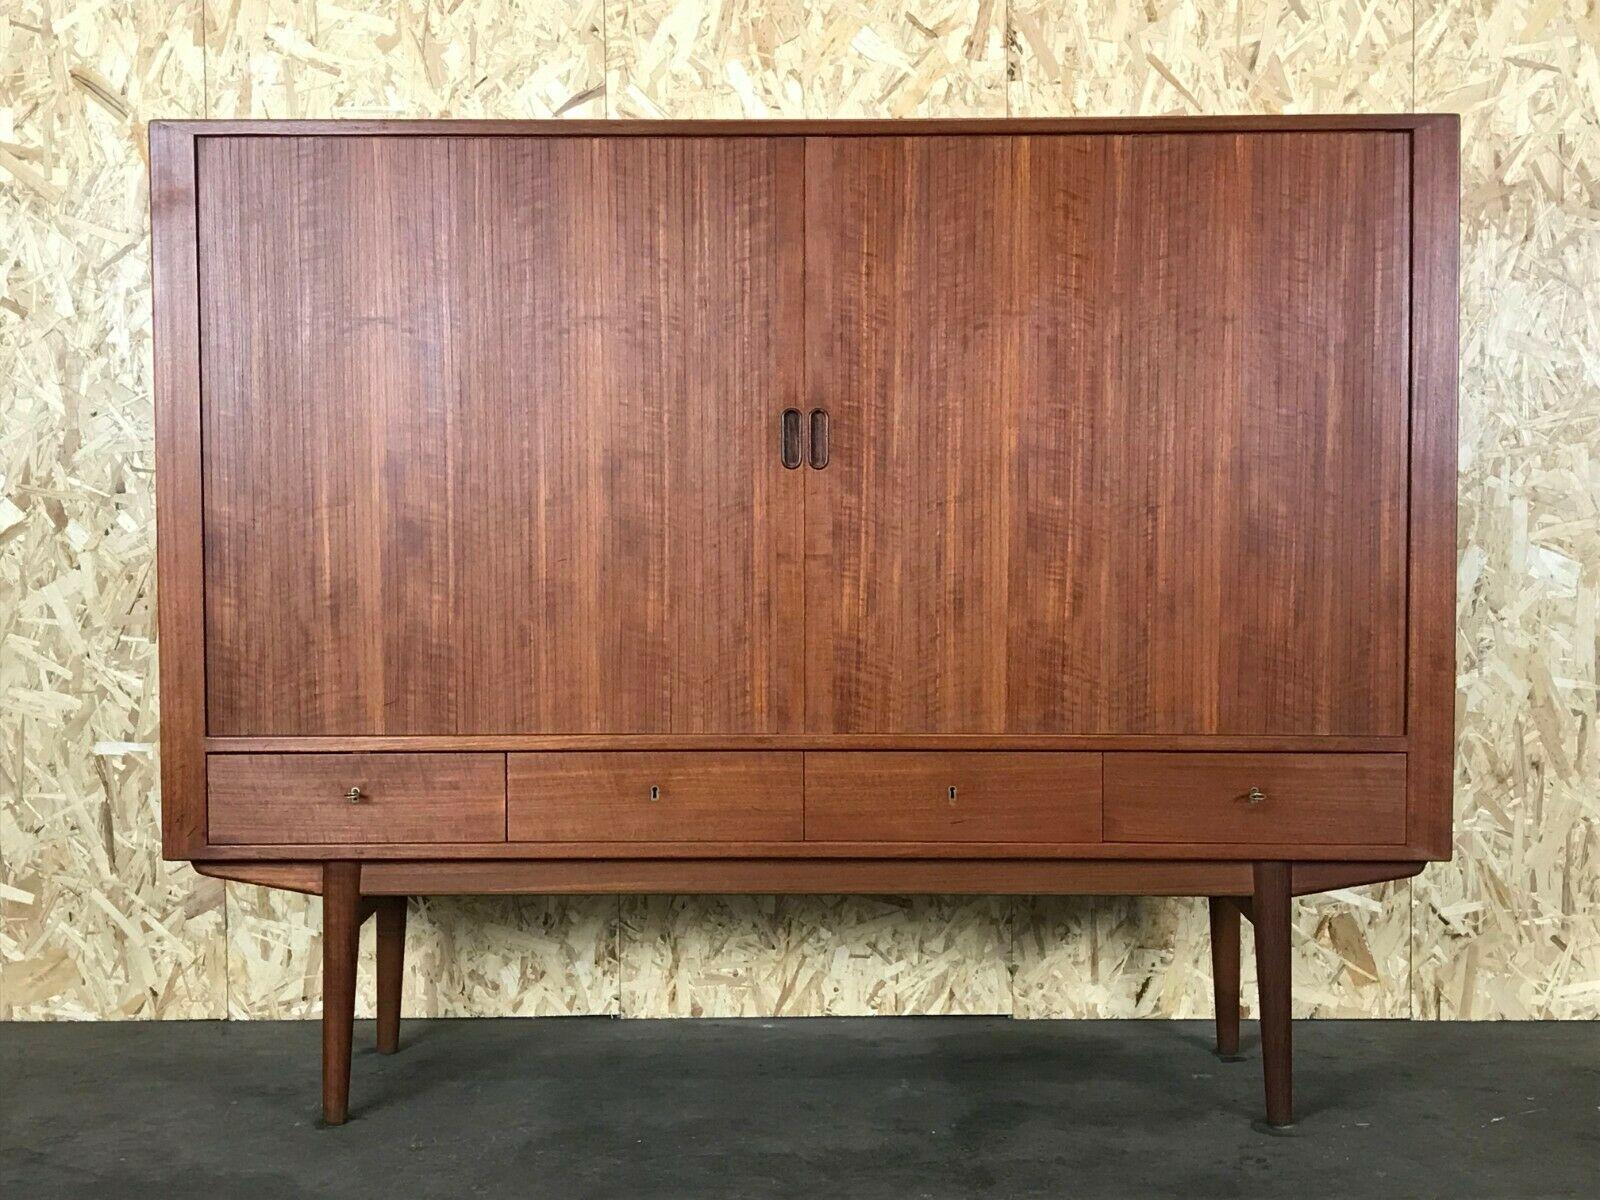 60s 70s sideboard highboard teak Arne Vodder Sibast model 54 design 60s

Object: high board

Manufacturer: Sibast

Condition: good

Age: around 1960-1970

Dimensions:

170cm x 44cm x 132.5cm

Other notes:

The pictures serve as part